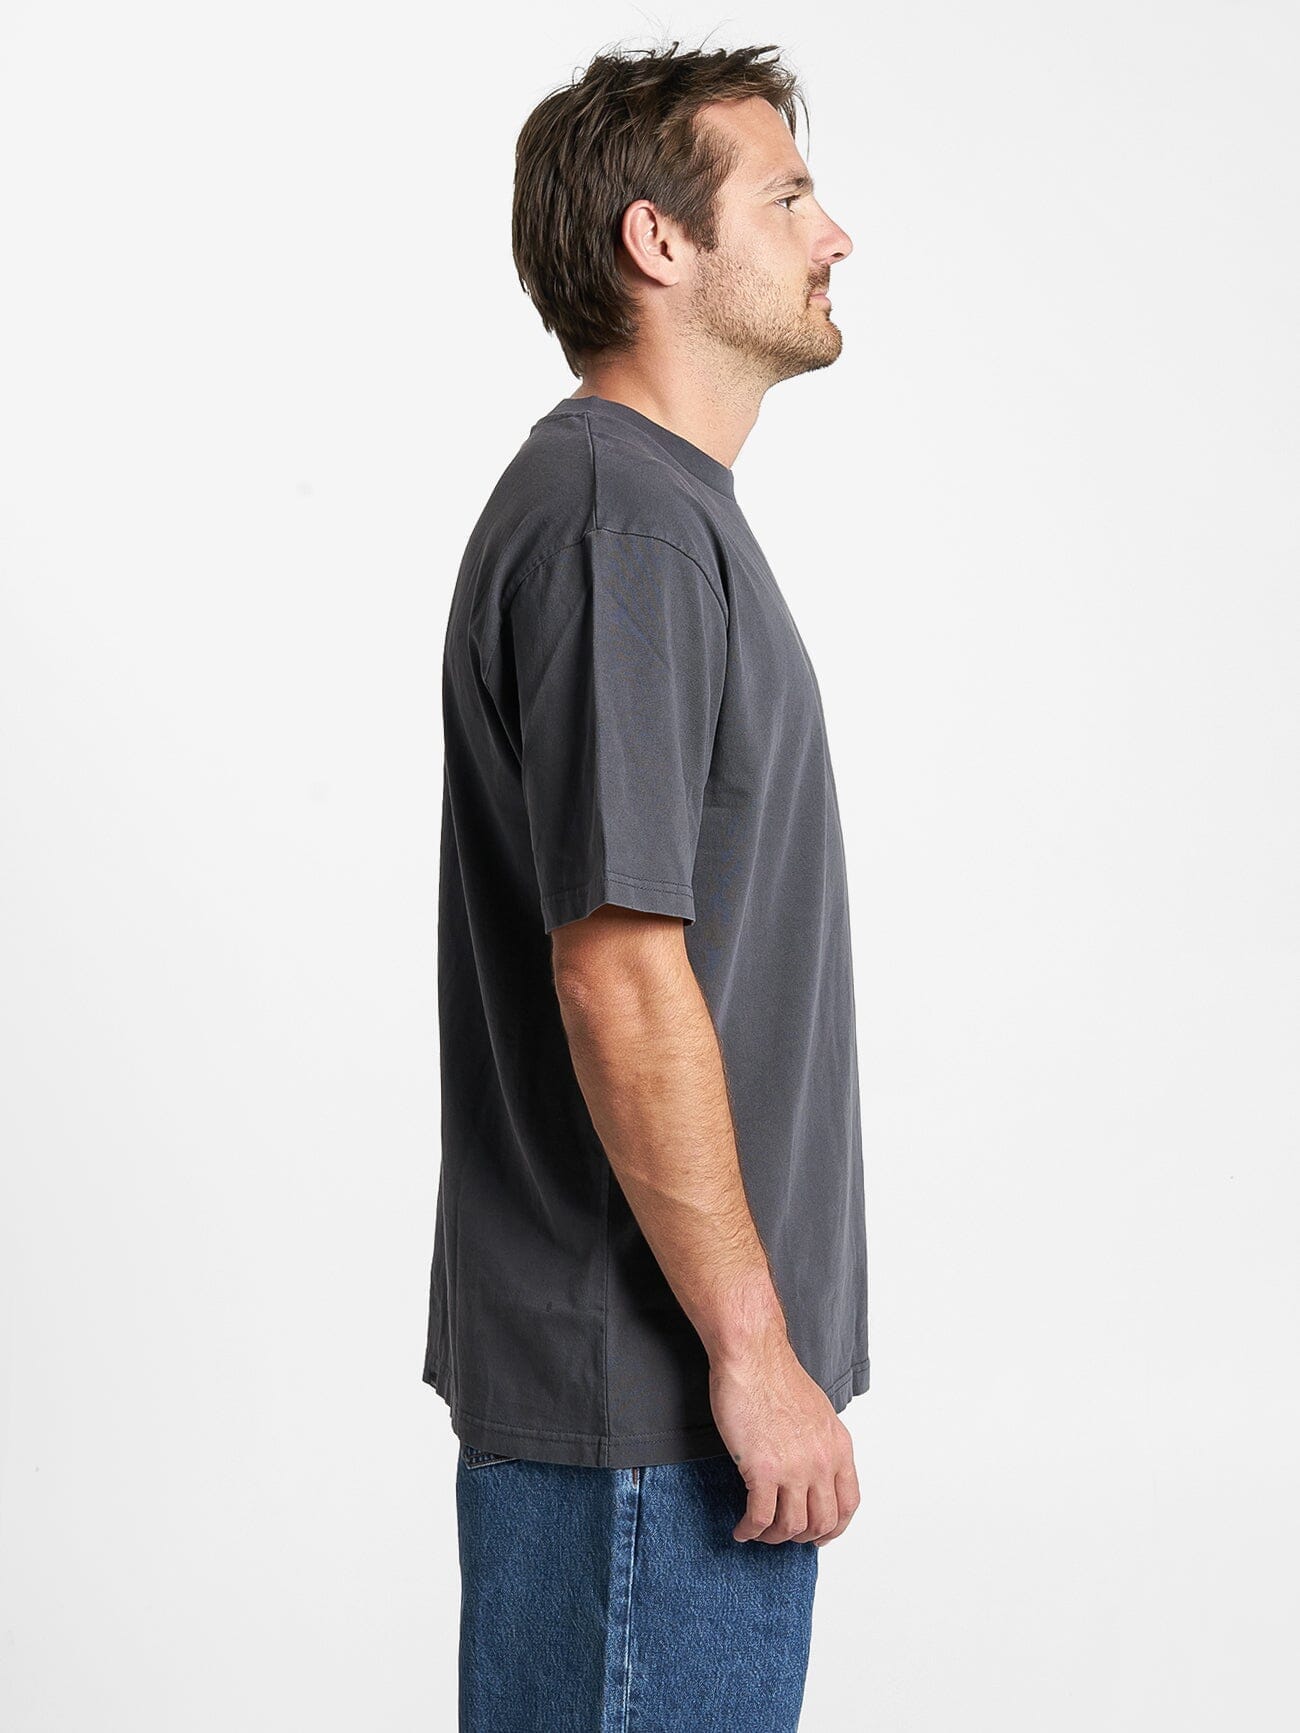 Thrills Military Oversize Fit Tee - Dark Charcoal